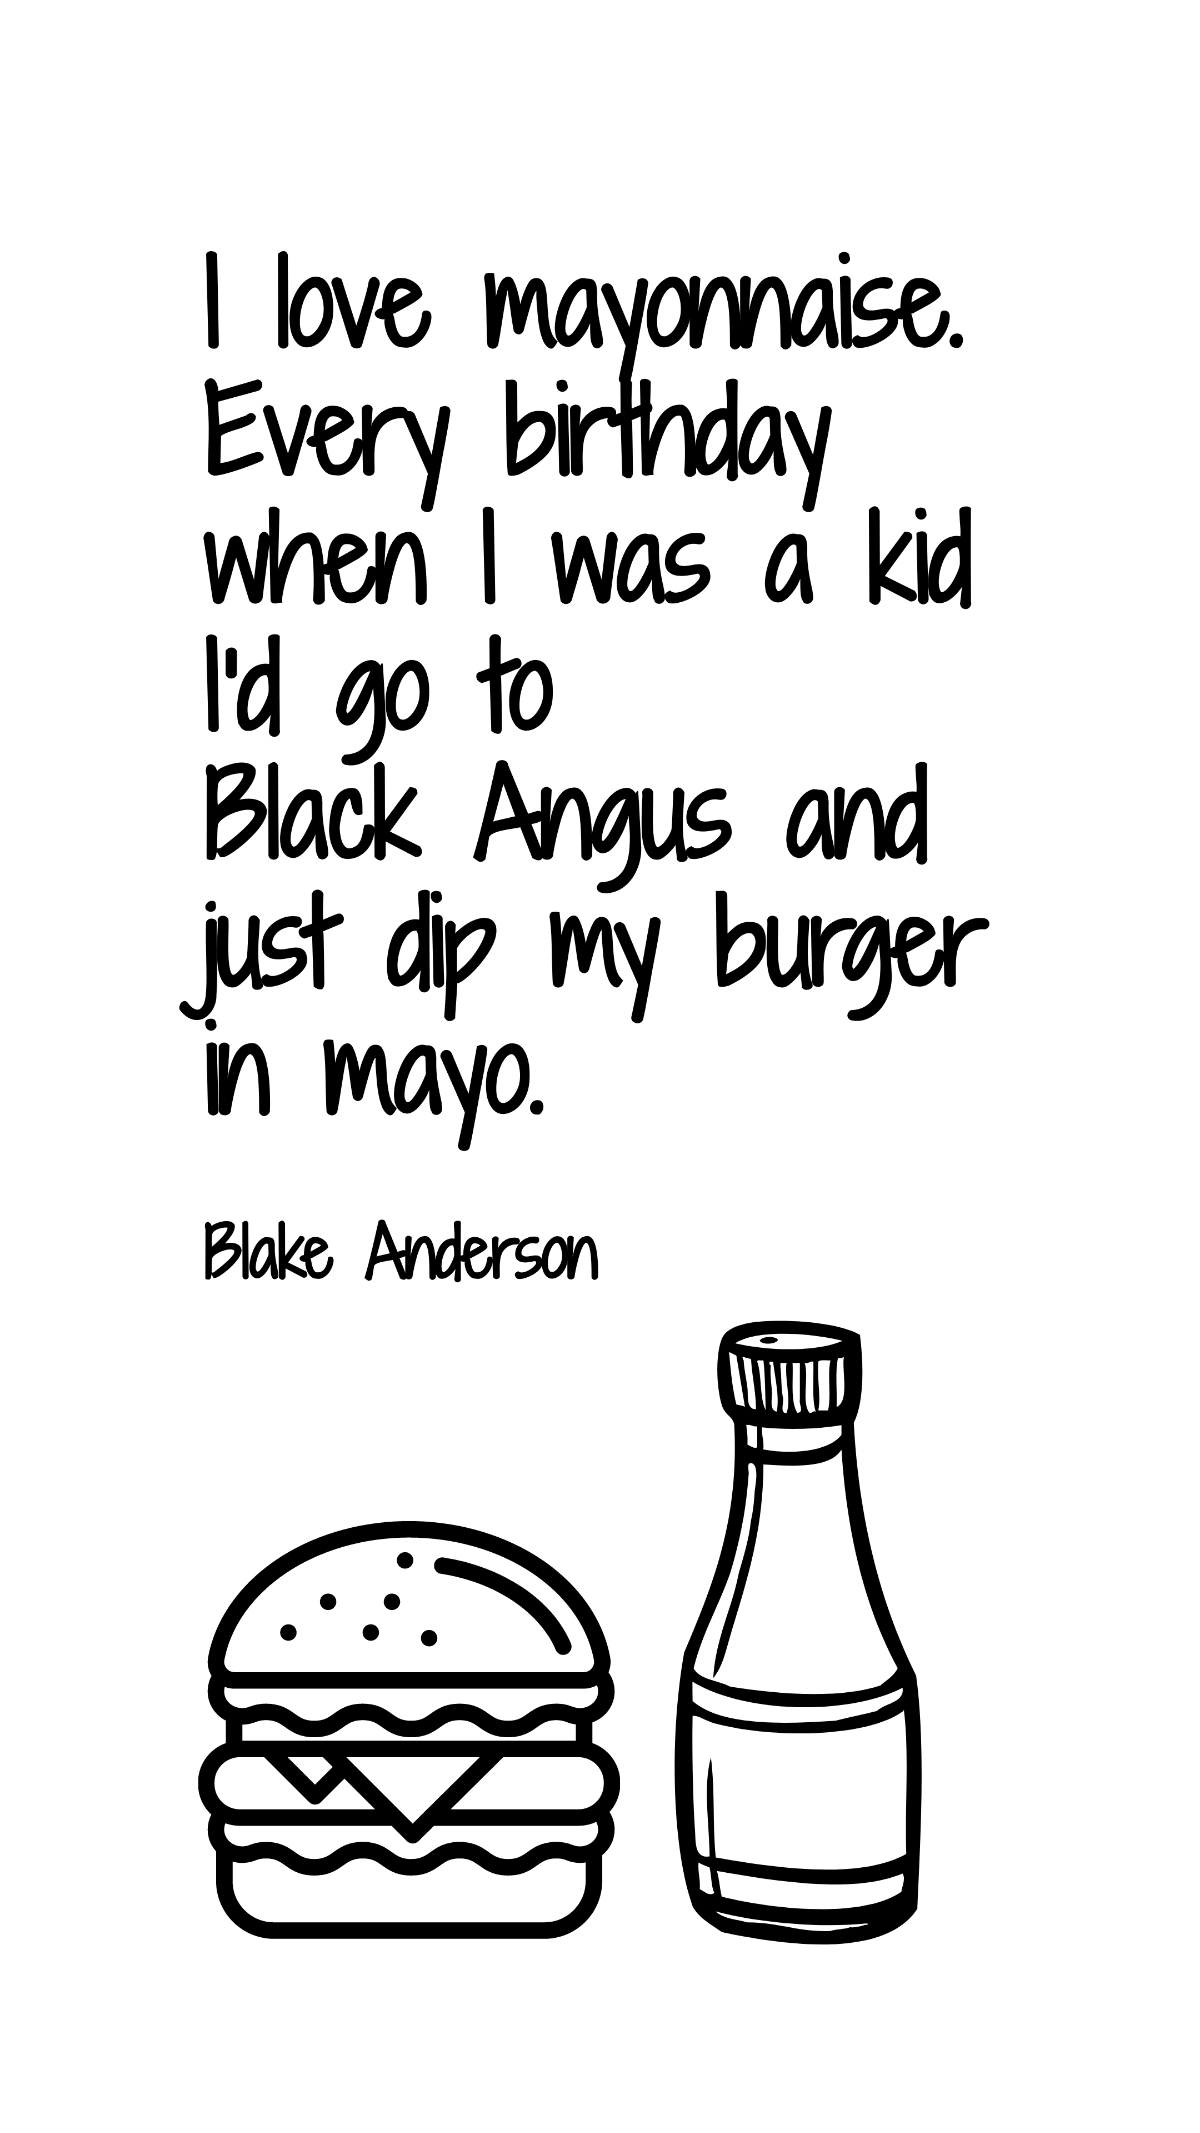 Blake Anderson - I love mayonnaise. Every birthday when I was a kid I'd go to Black Angus and just dip my burger in mayo.